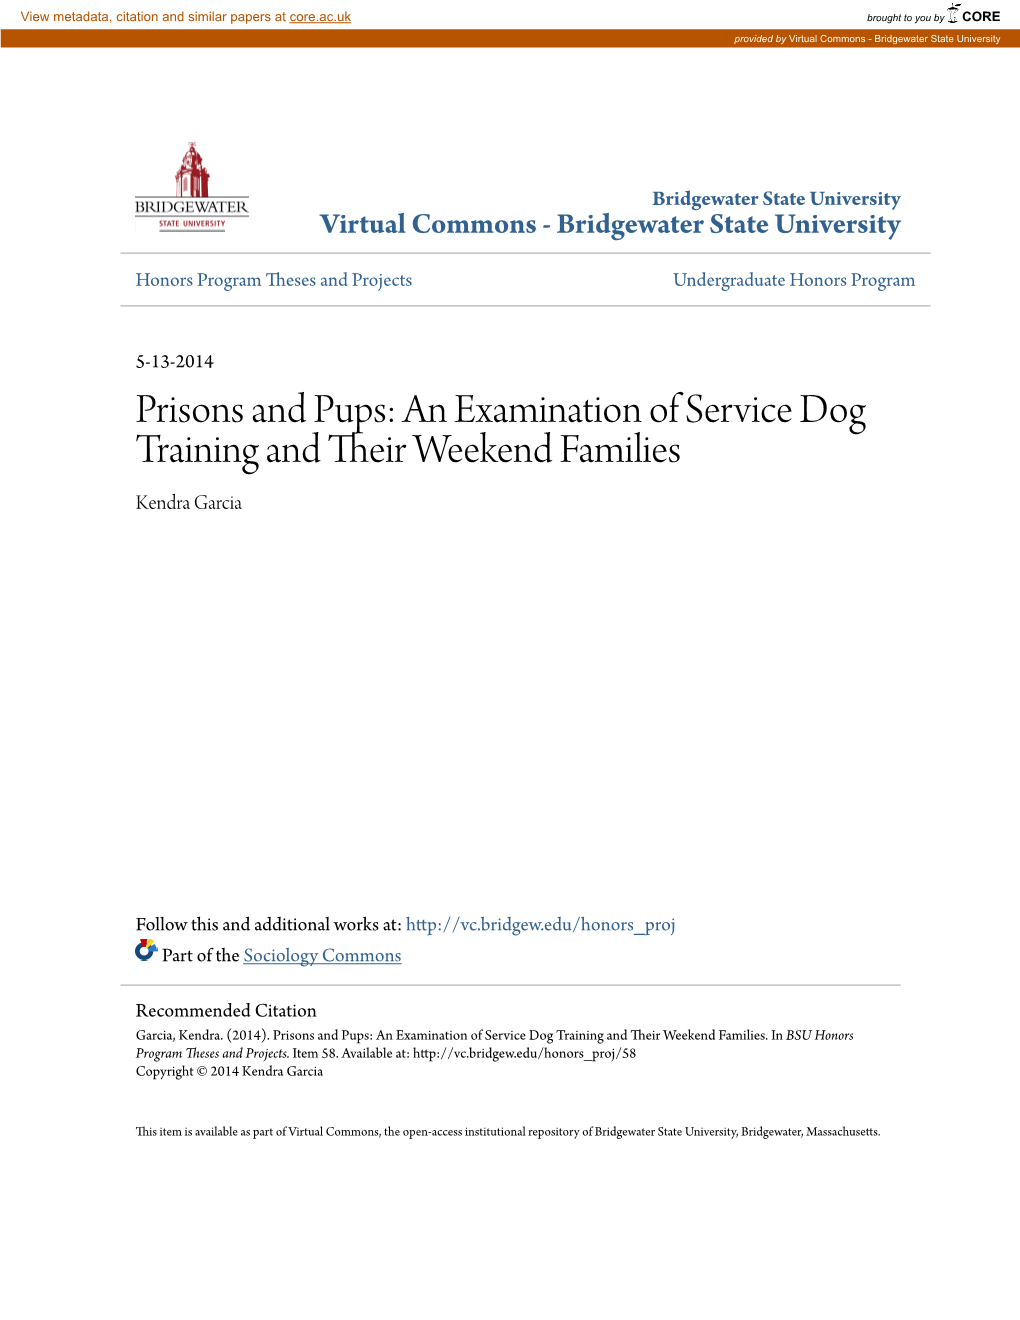 Prisons and Pups: an Examination of Service Dog Training and Their Eekw End Families Kendra Garcia